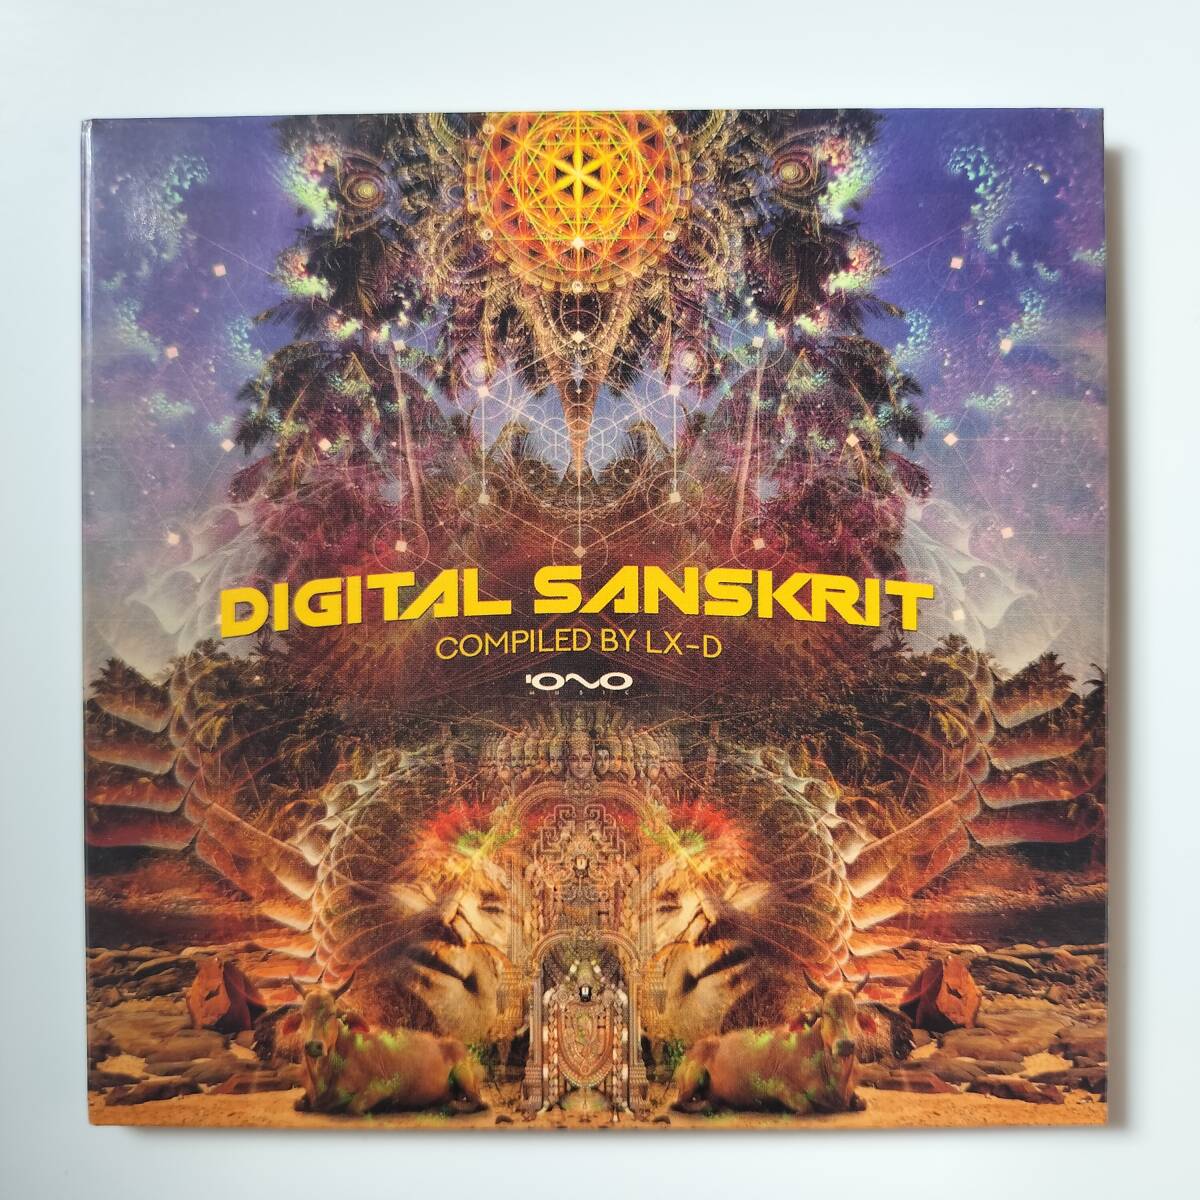 DIGITAL SANSKRIT - COMPILED BY LX-D /2018 Iono Music INM2CD086 psychedelic trance_画像1